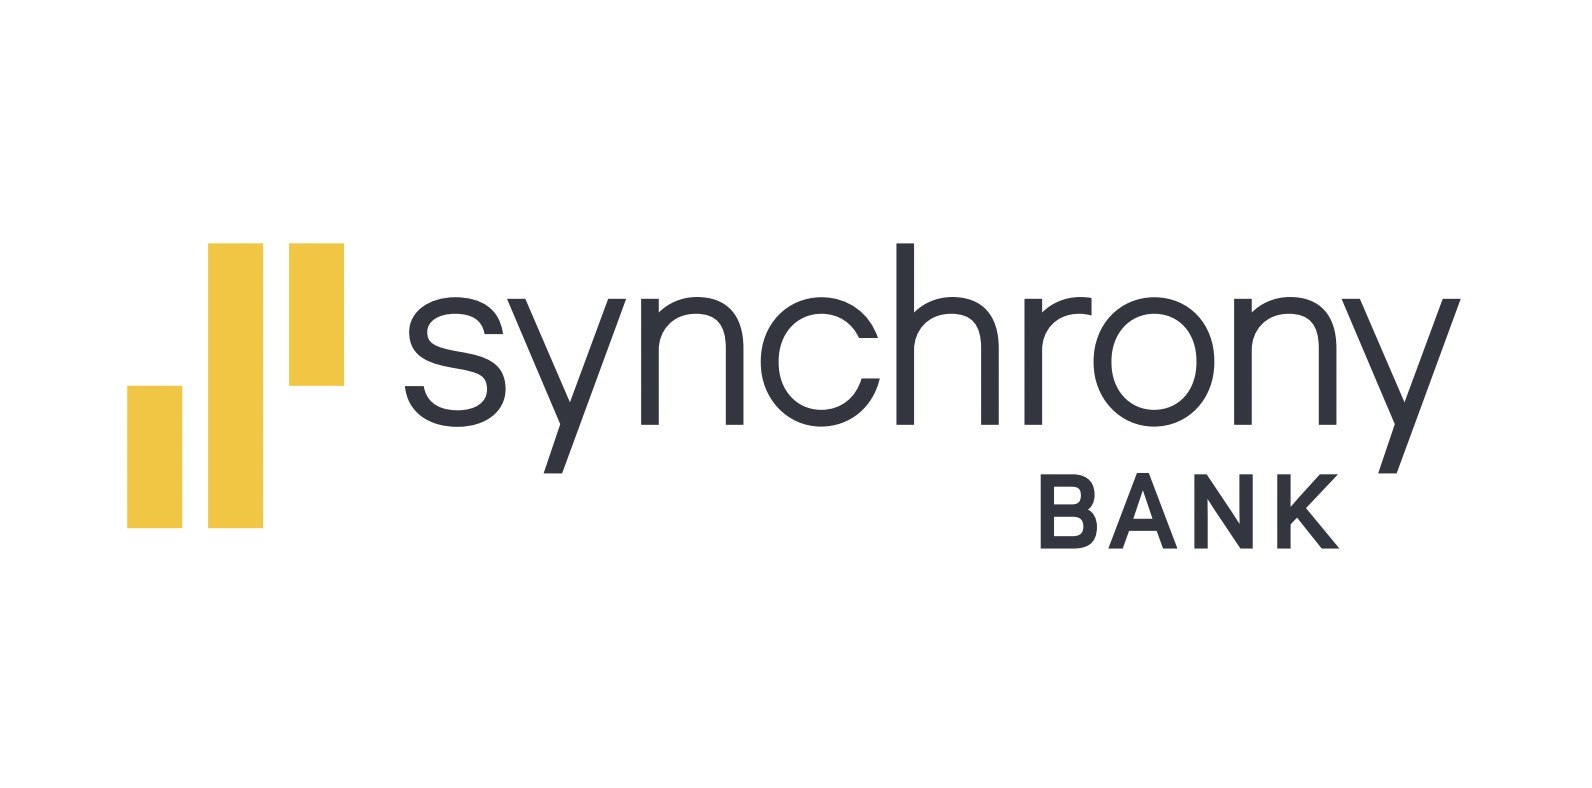 Synchrony logo symbolizing reliable heating & air conditioning financing solutions